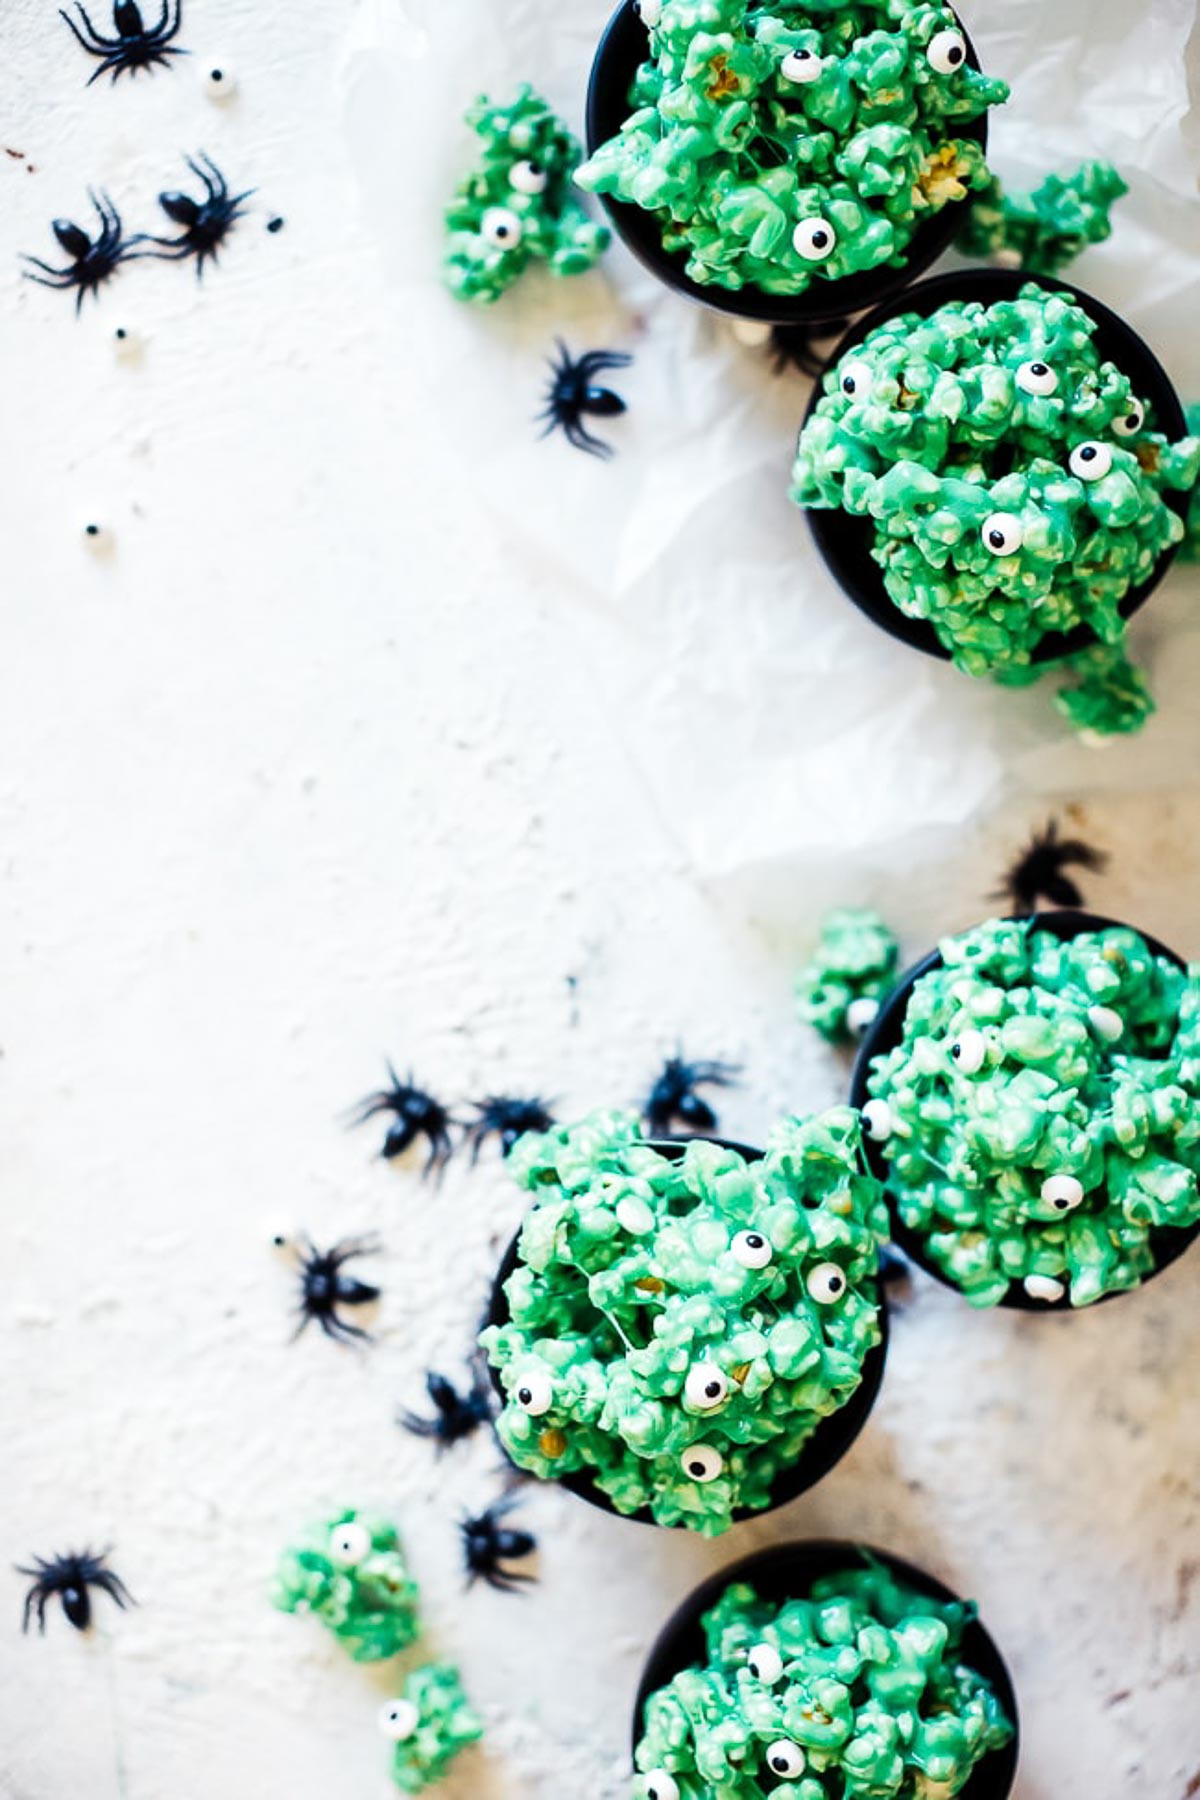 Small black bowls on a white counter, filled with halloween popcorn. There are plastic spiders scattered around.